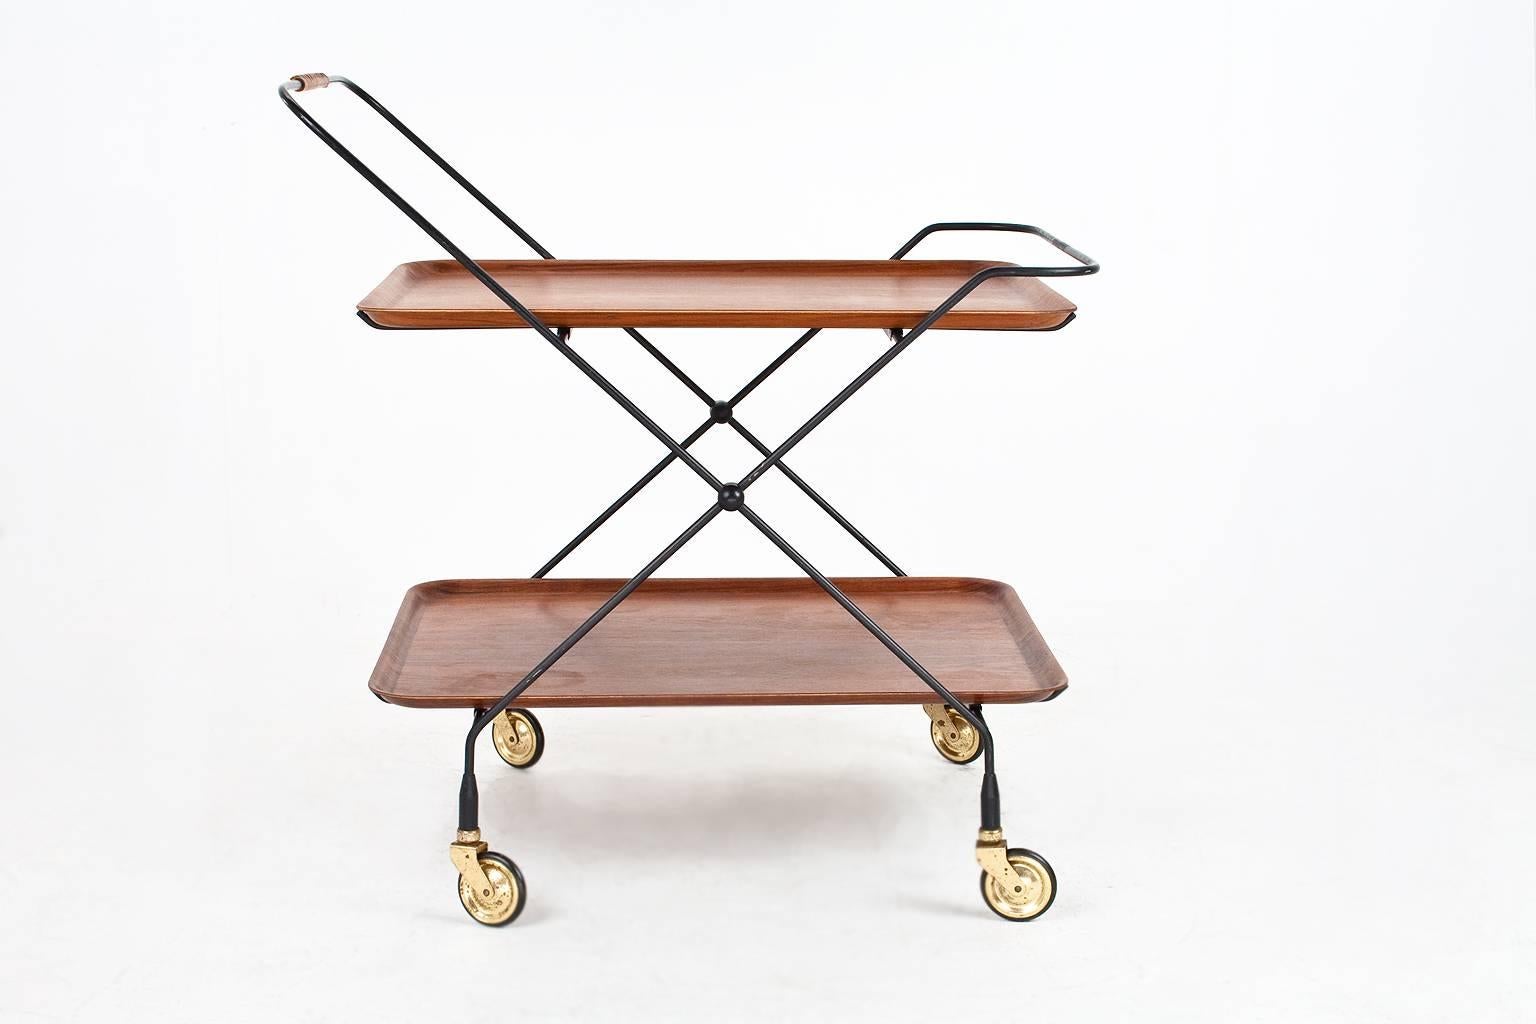 Beautiful Swedish Mid-Century Modern serving table or trolley with two teak serving trays on a black lacquered metal frame with four rotatable wheels. The trolley is foldable as shown on last photo. This piece is in excellent condition, branded